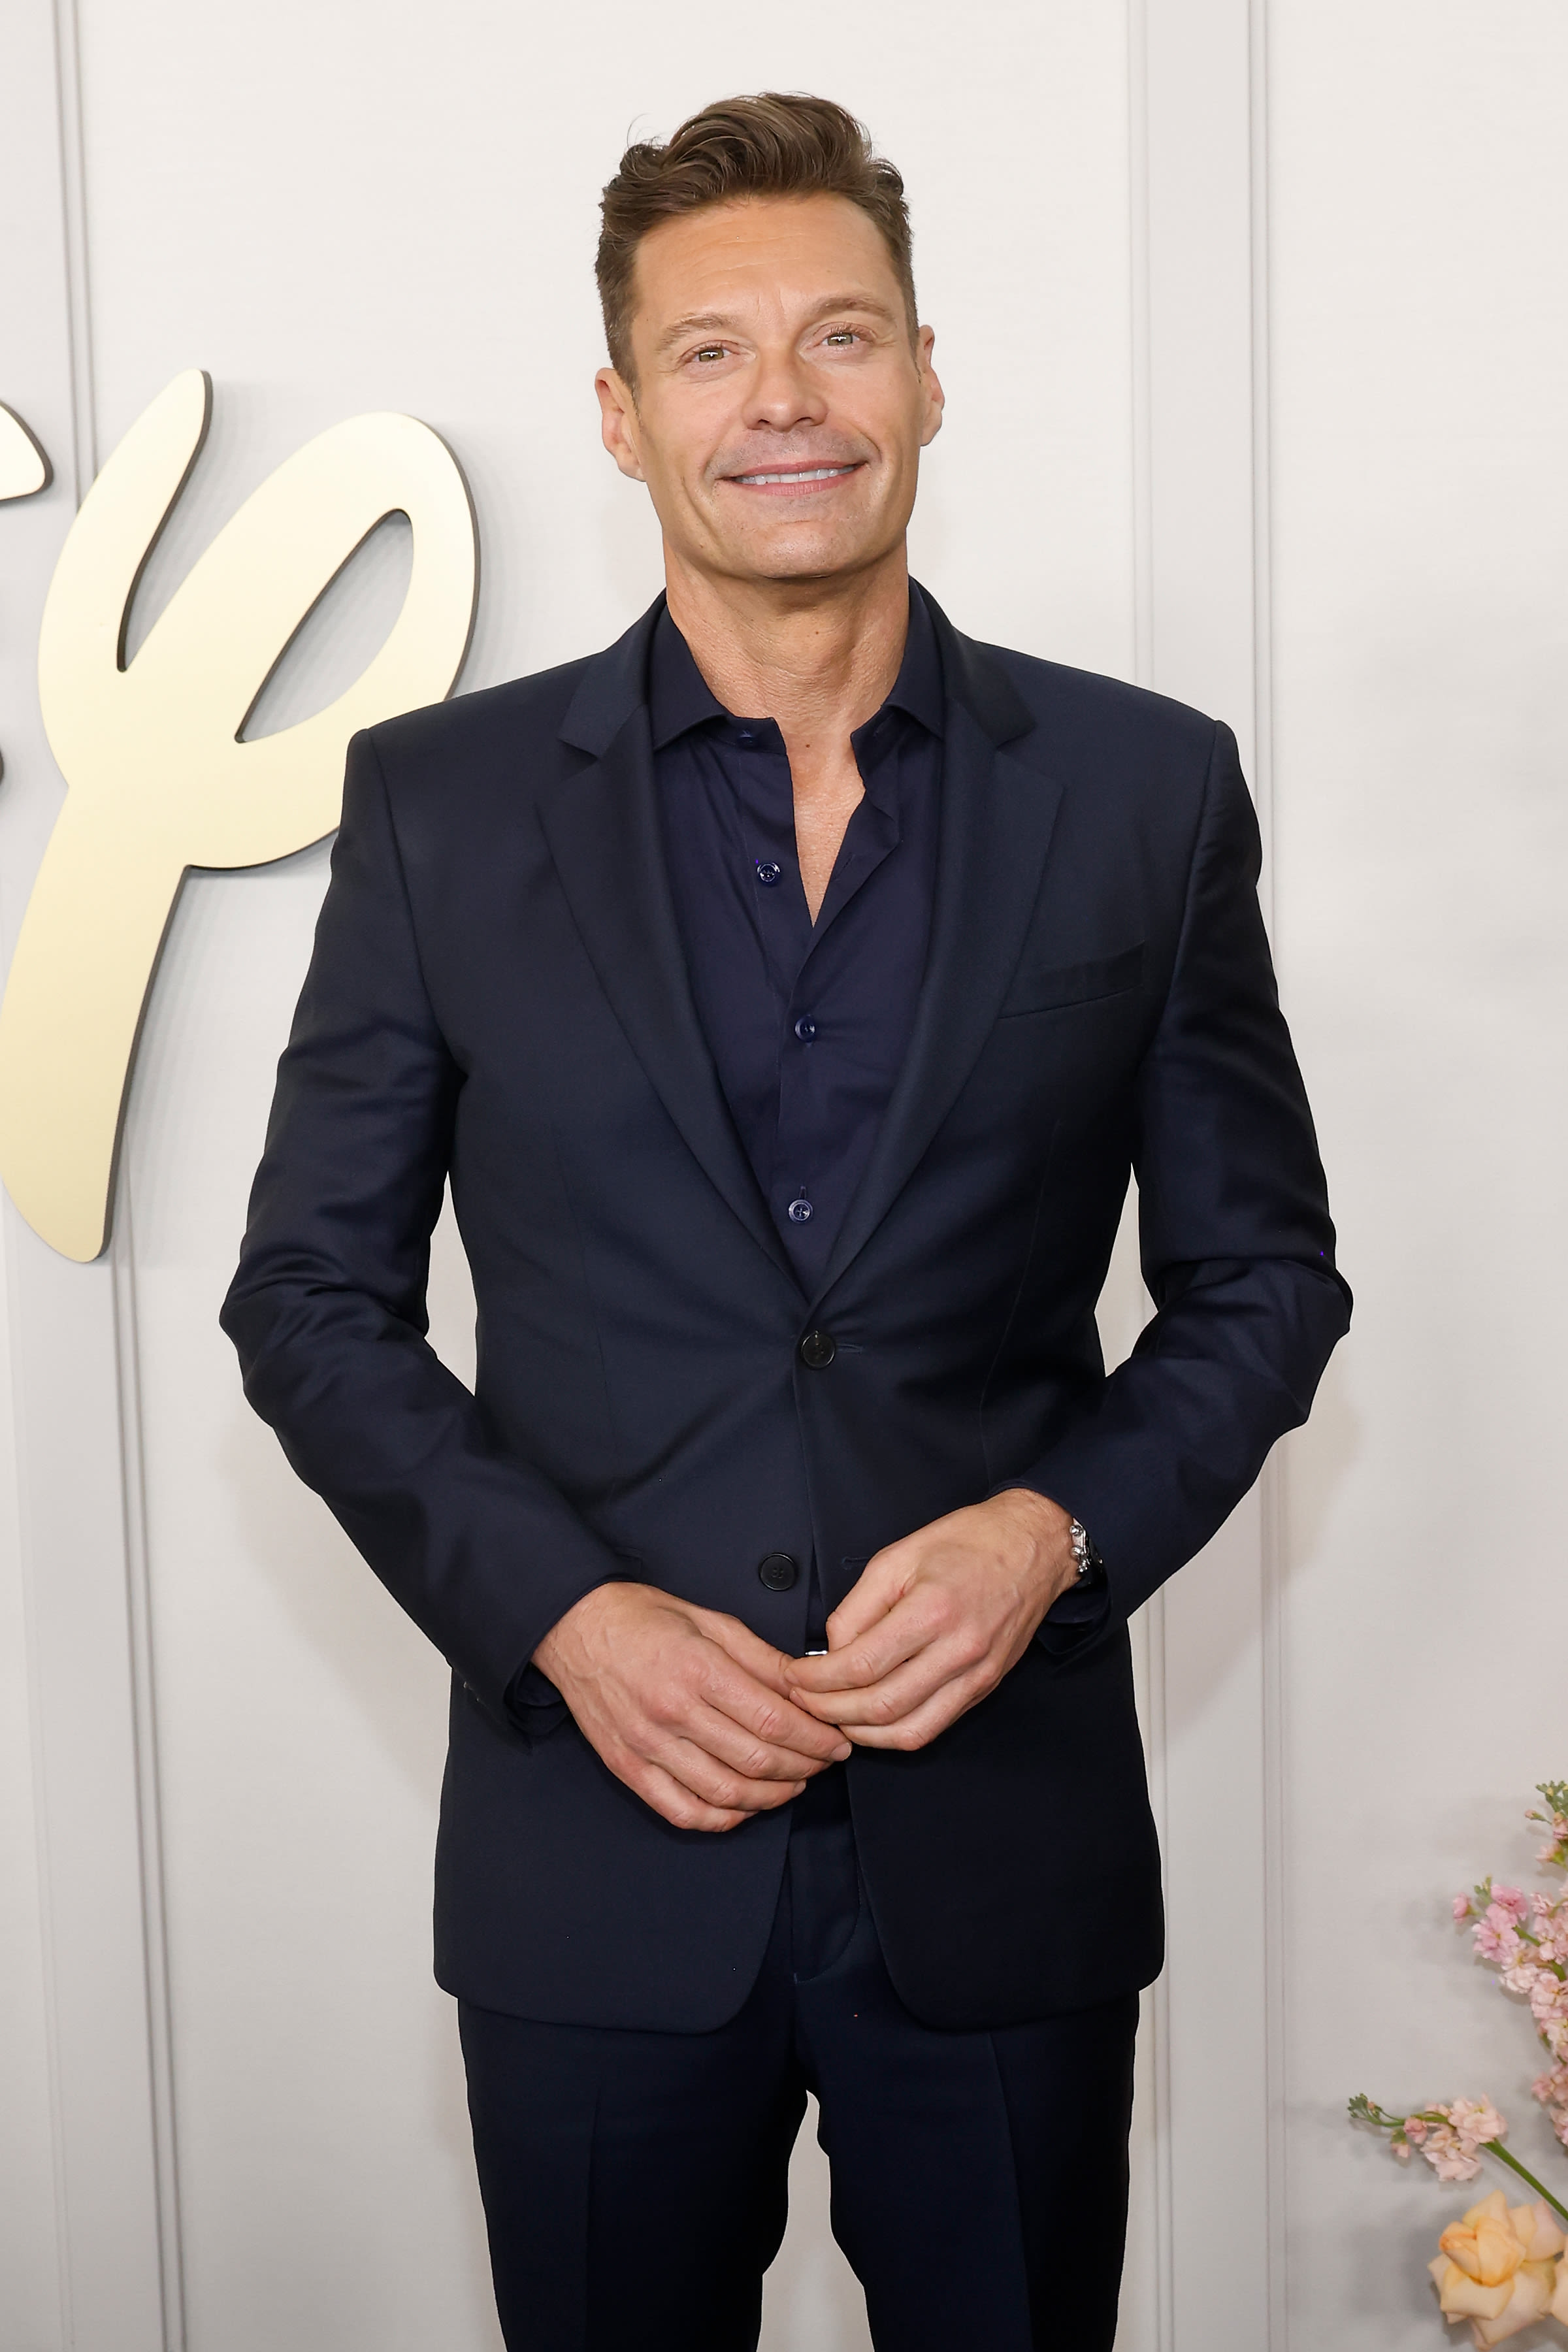 Ryan Seacrest Does ‘Background Checks’ for Potential Girlfriends! His Dating Criteria Revealed